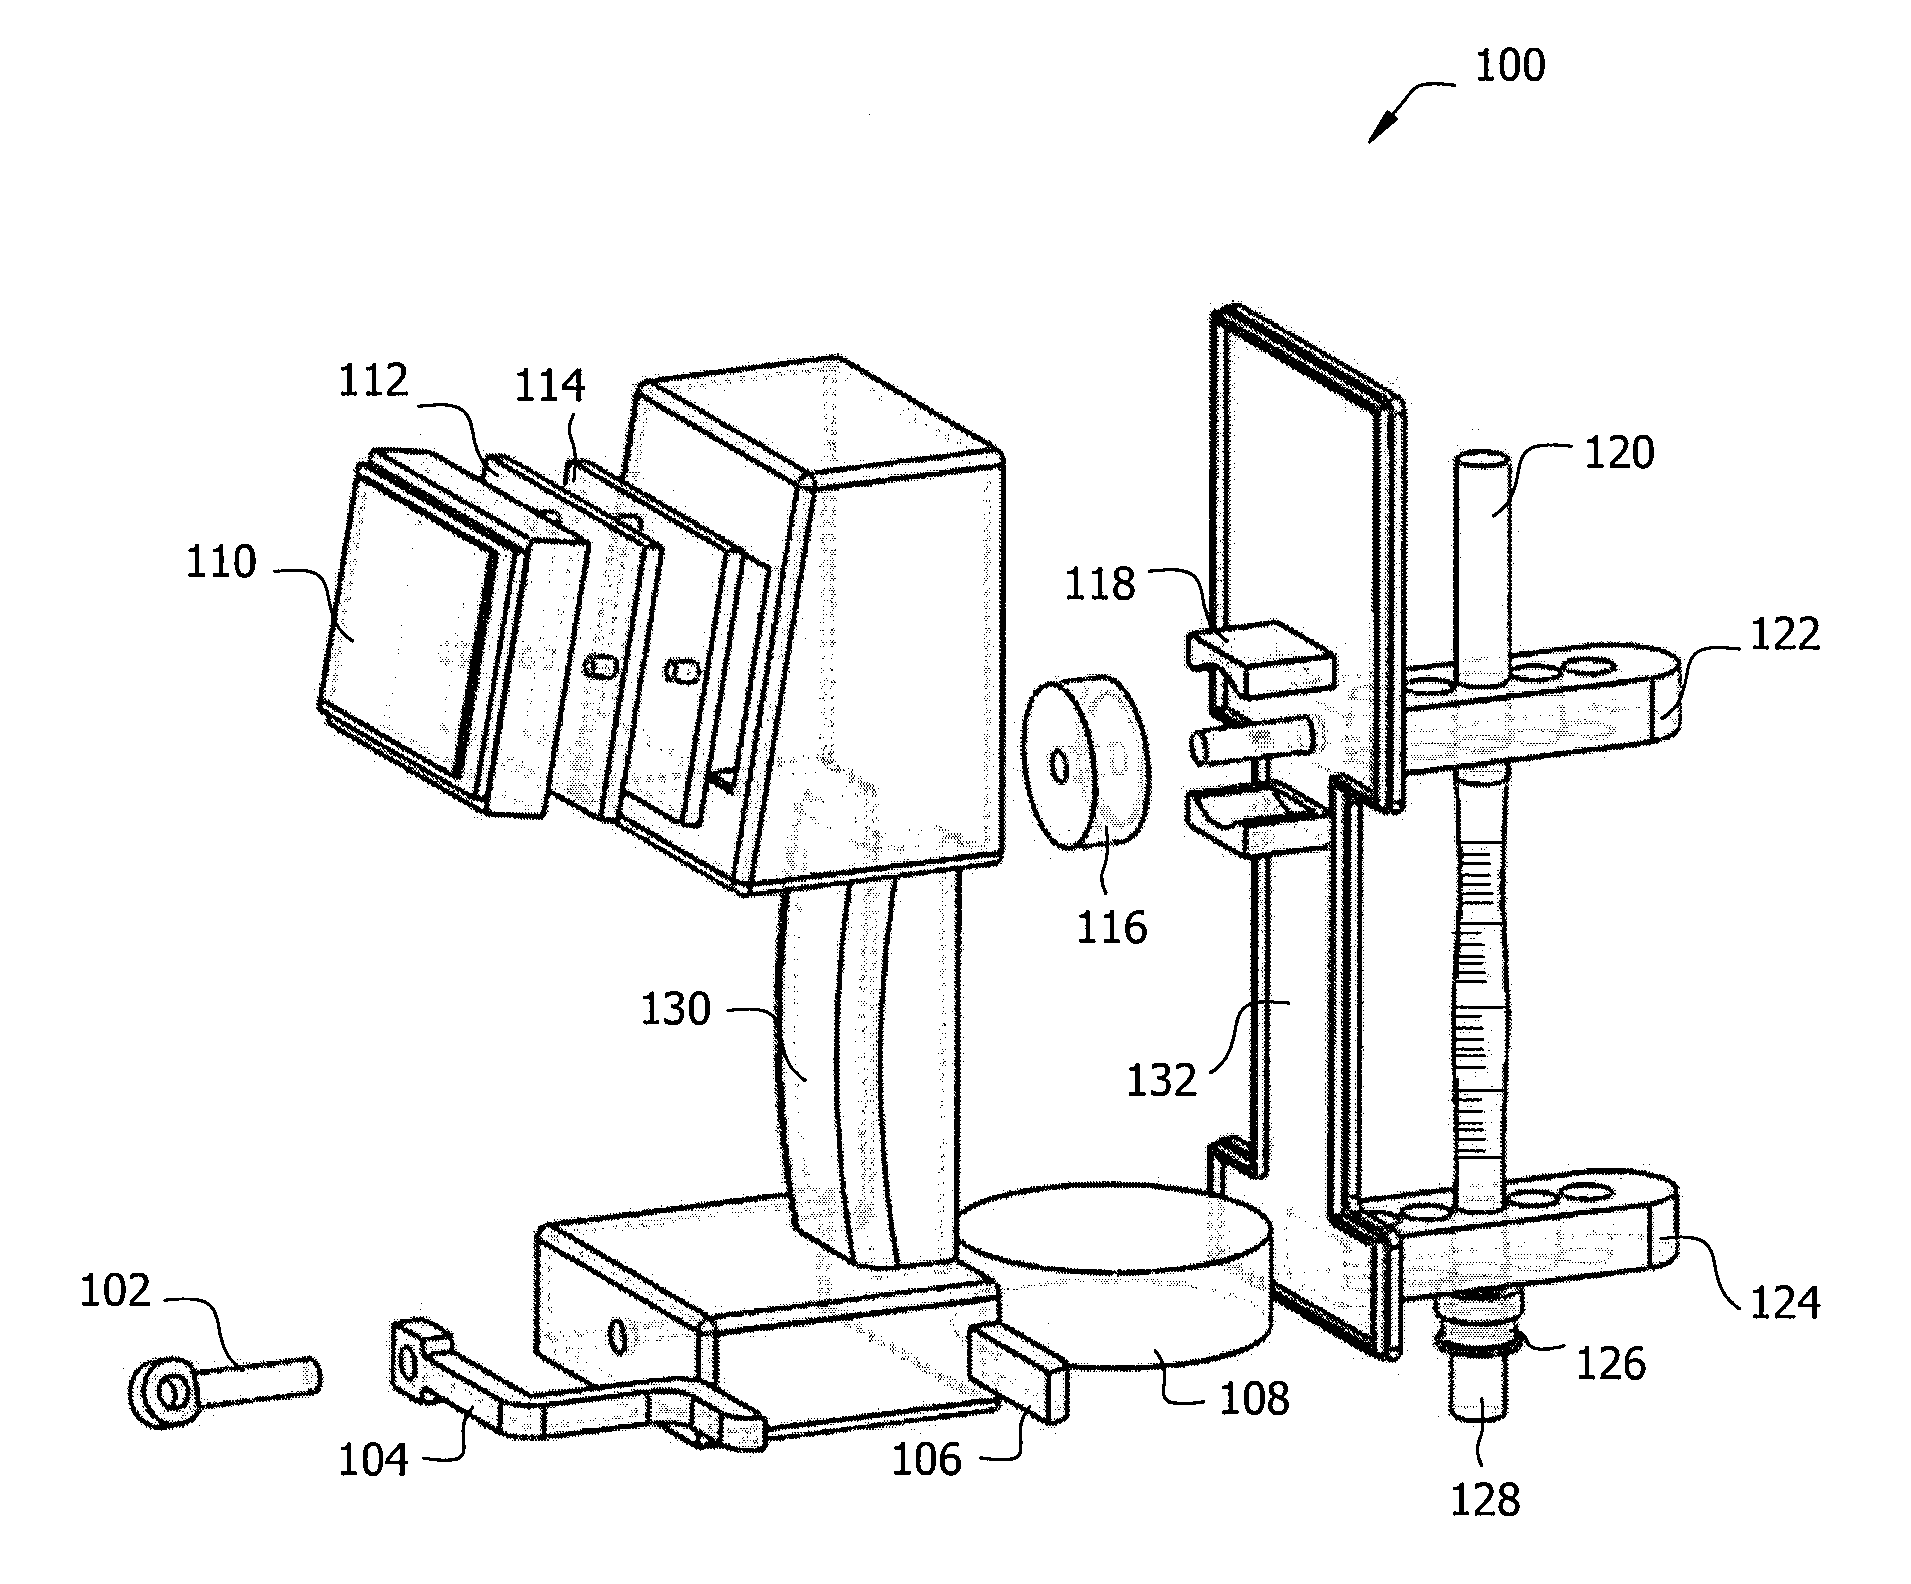 Hand muscle measurement device